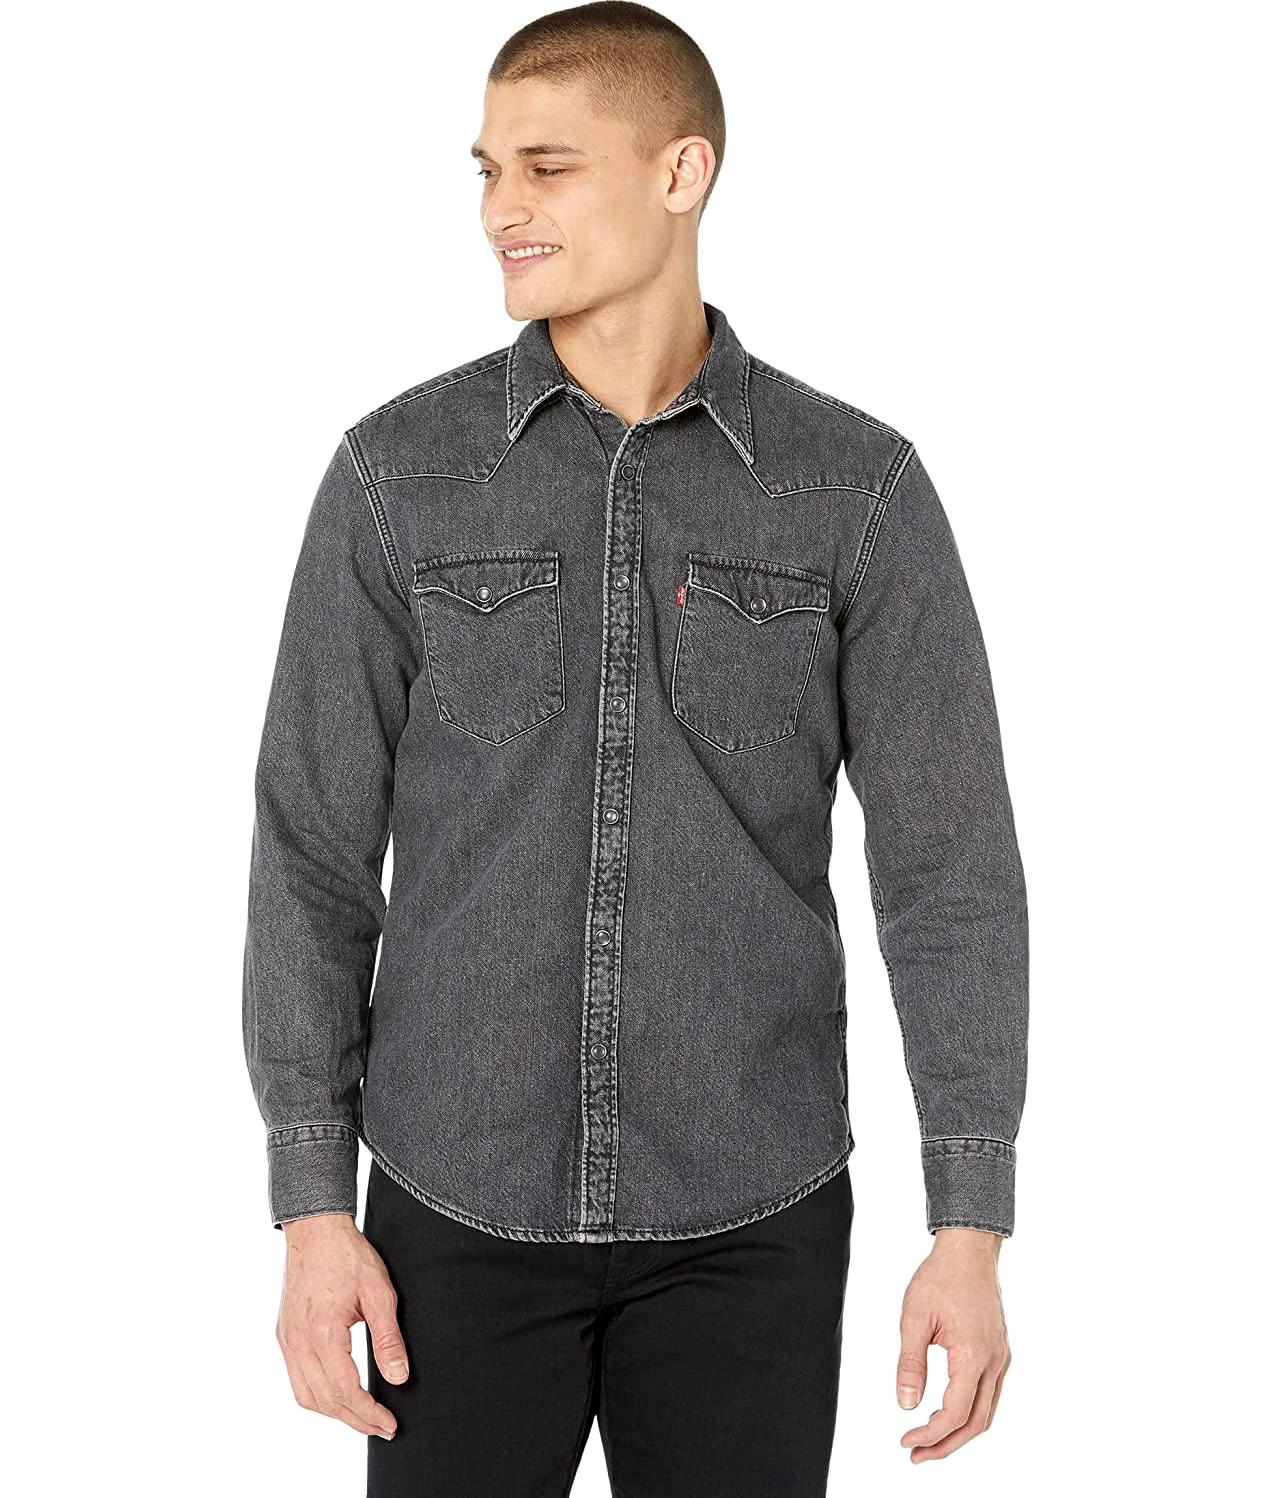 Levi's Barstow Western Standard in Black Washed